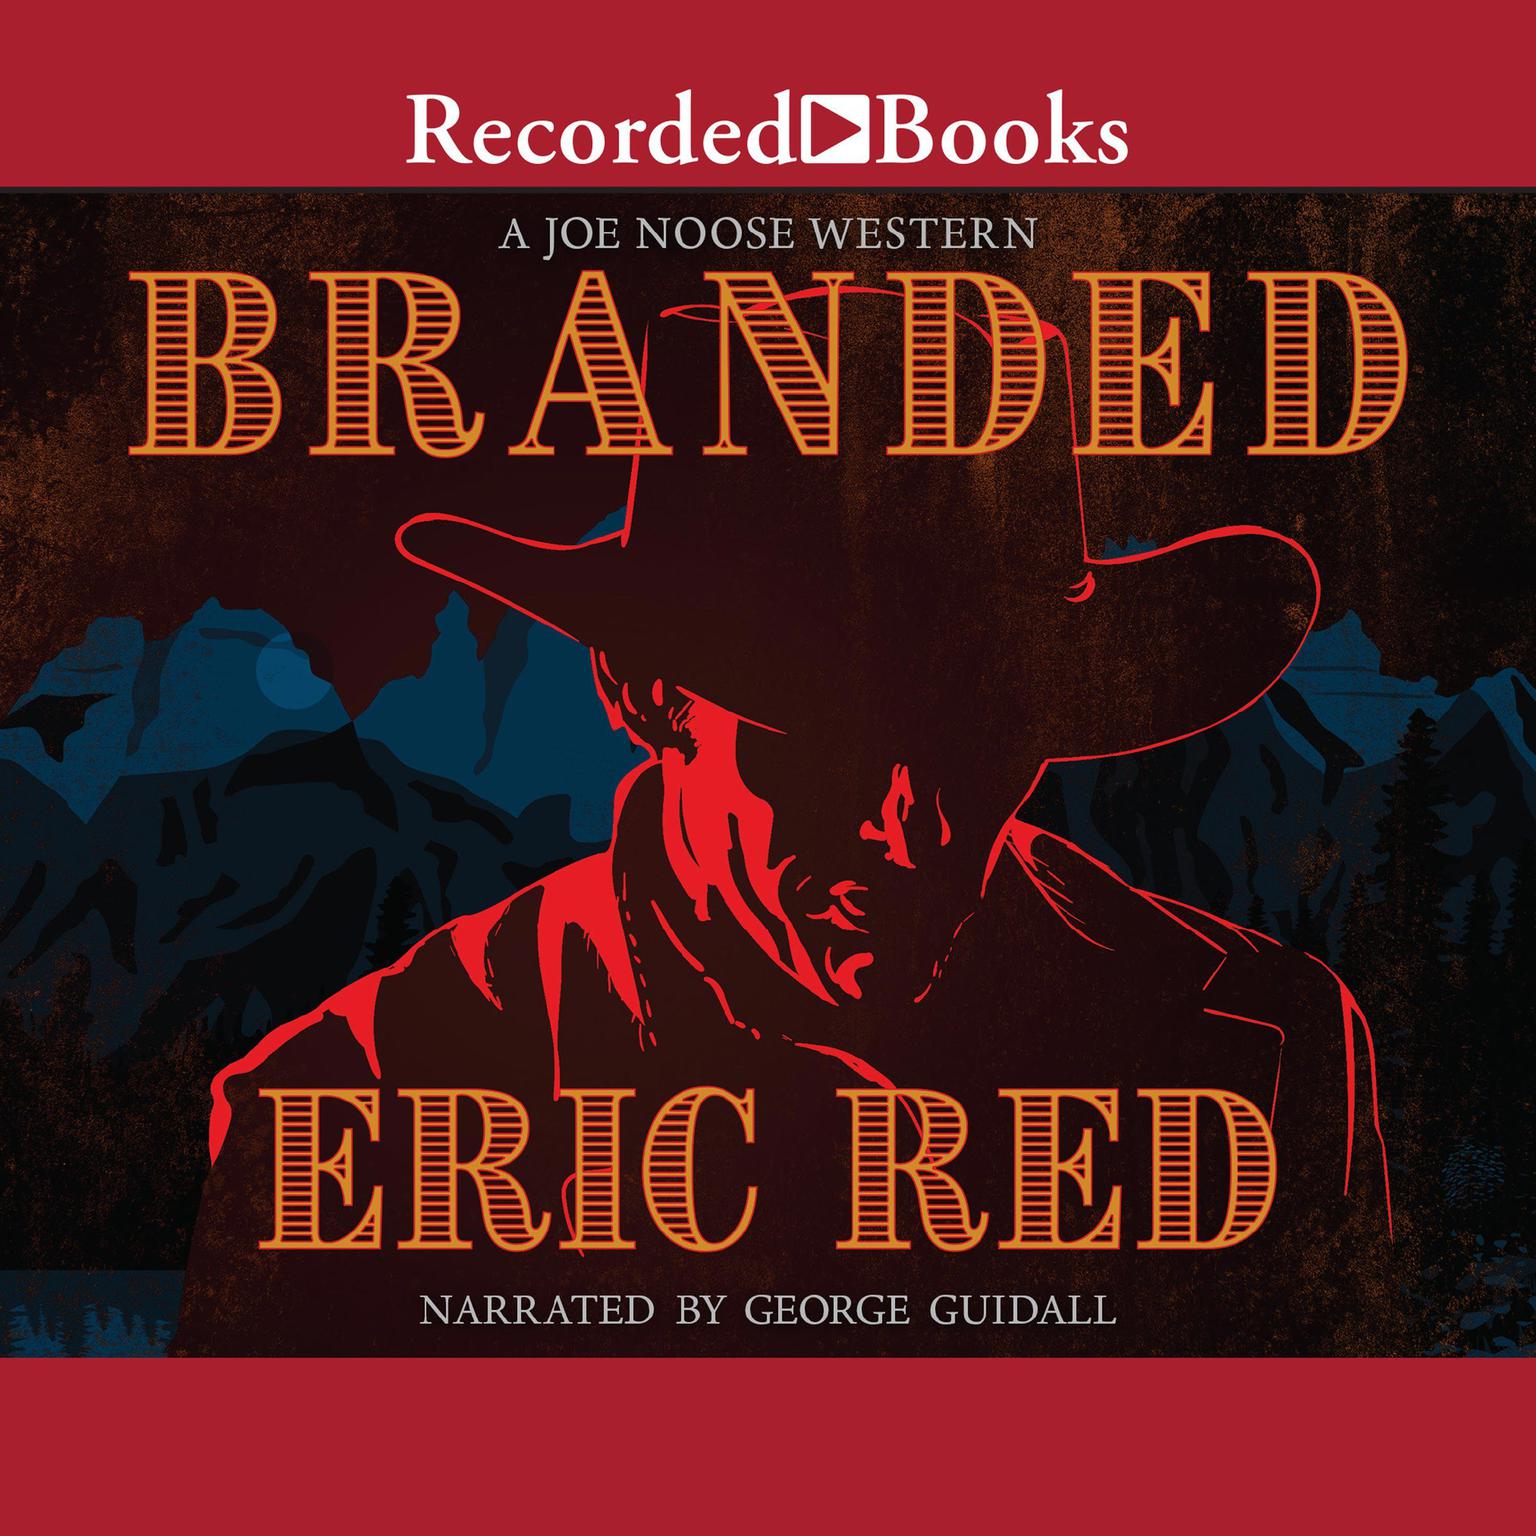 Branded Audiobook, by Eric Red